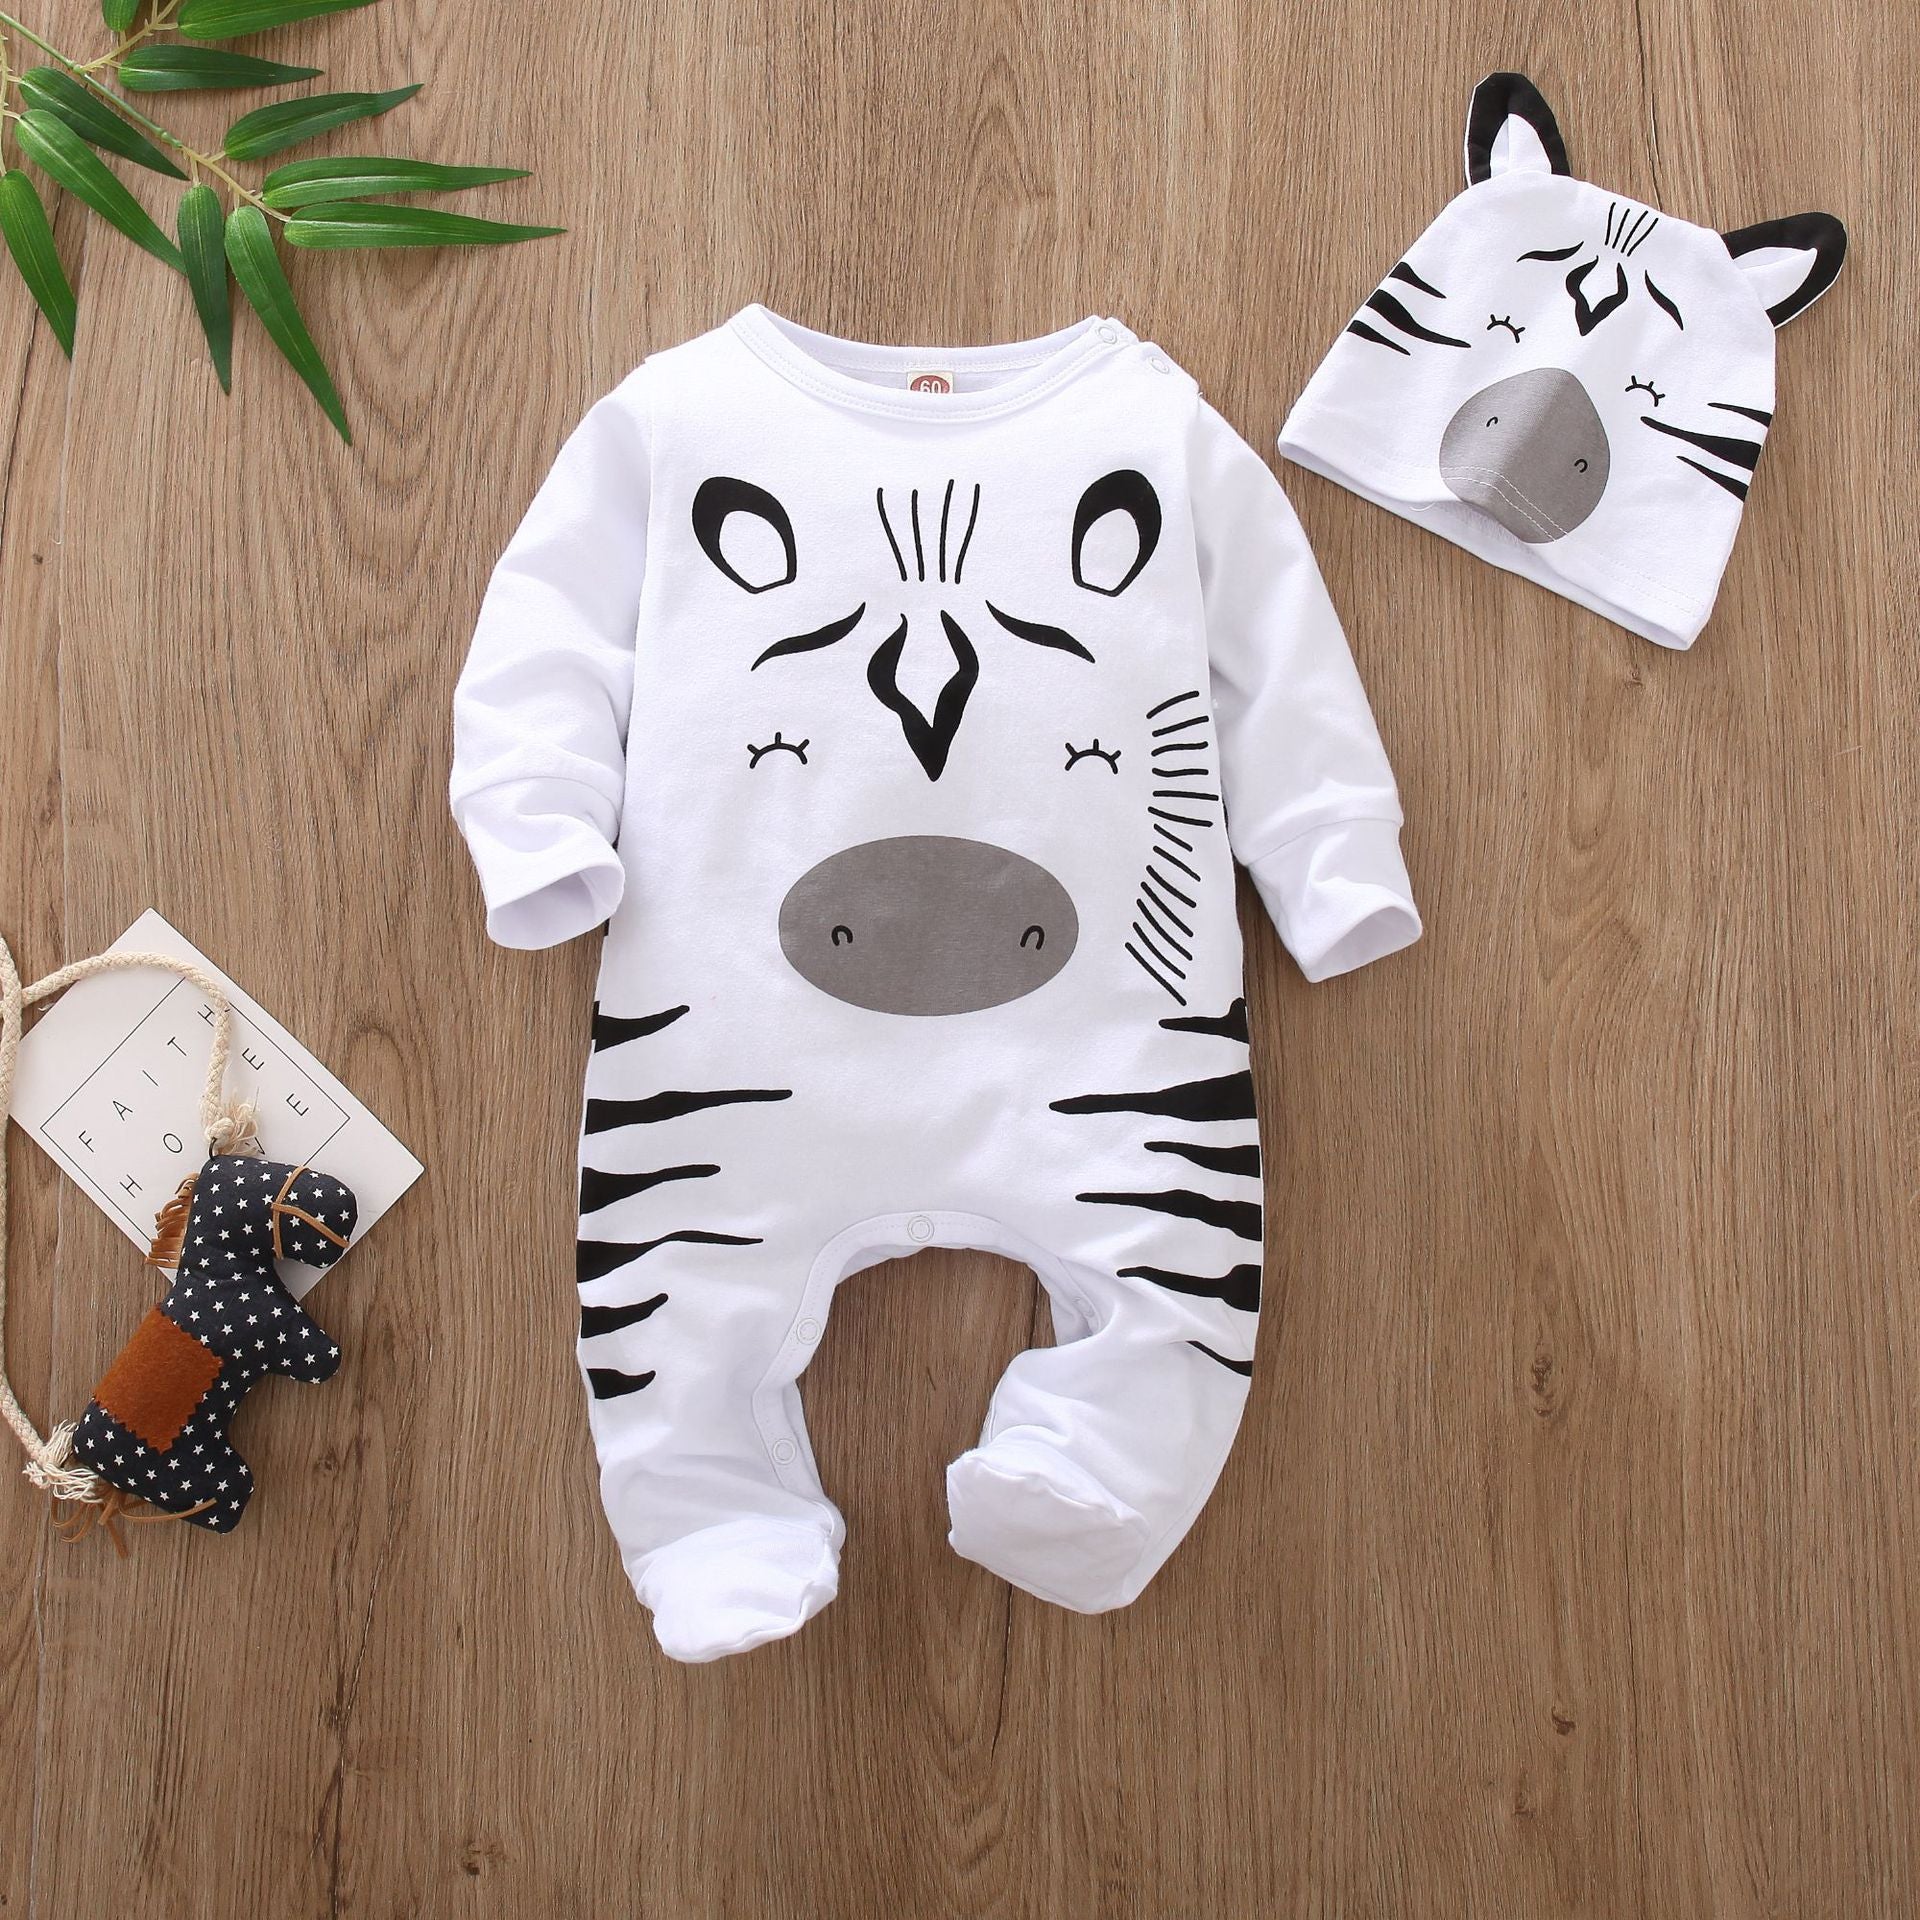 Wrap Your Baby in Cuteness and Comfort with Our Animal Print Romper